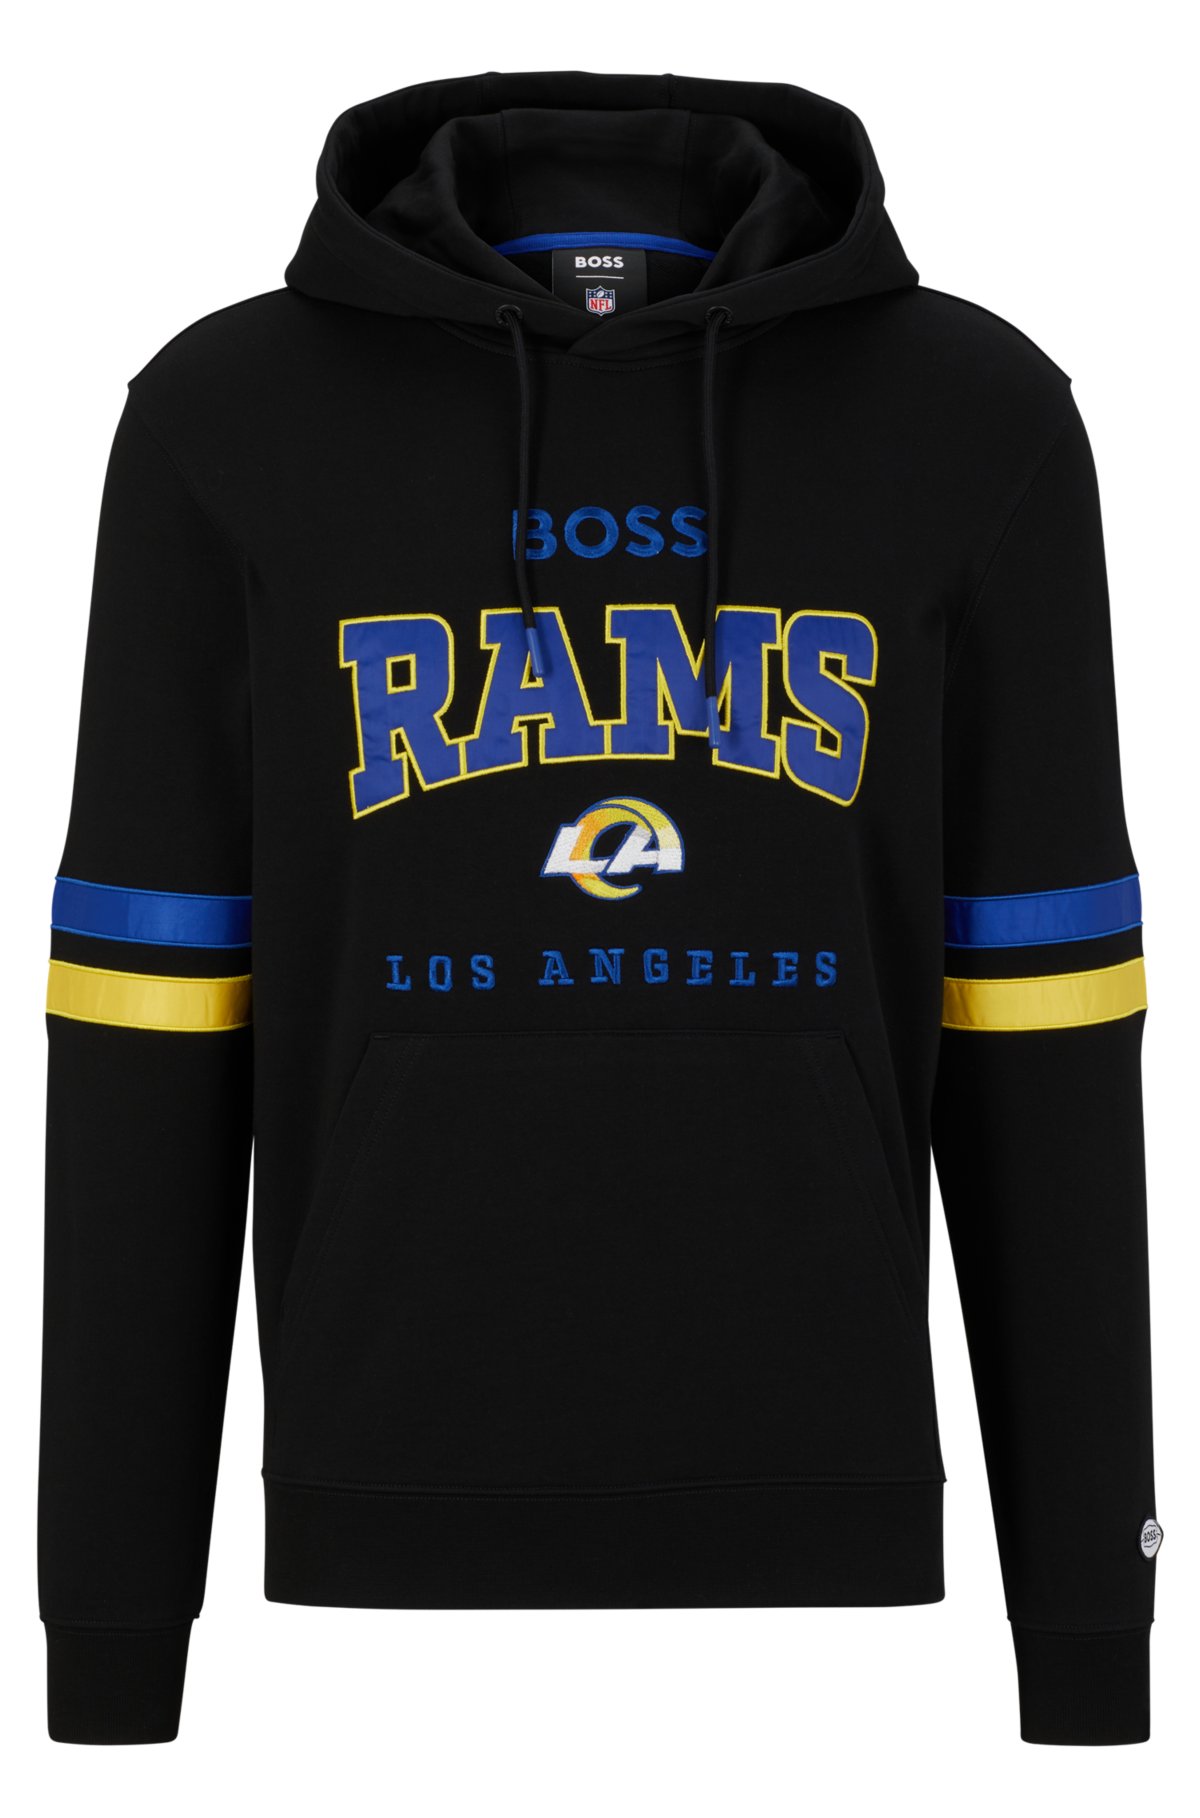 Boss Men's NFL Rams Pullover Hoodie - Black - Size x Large